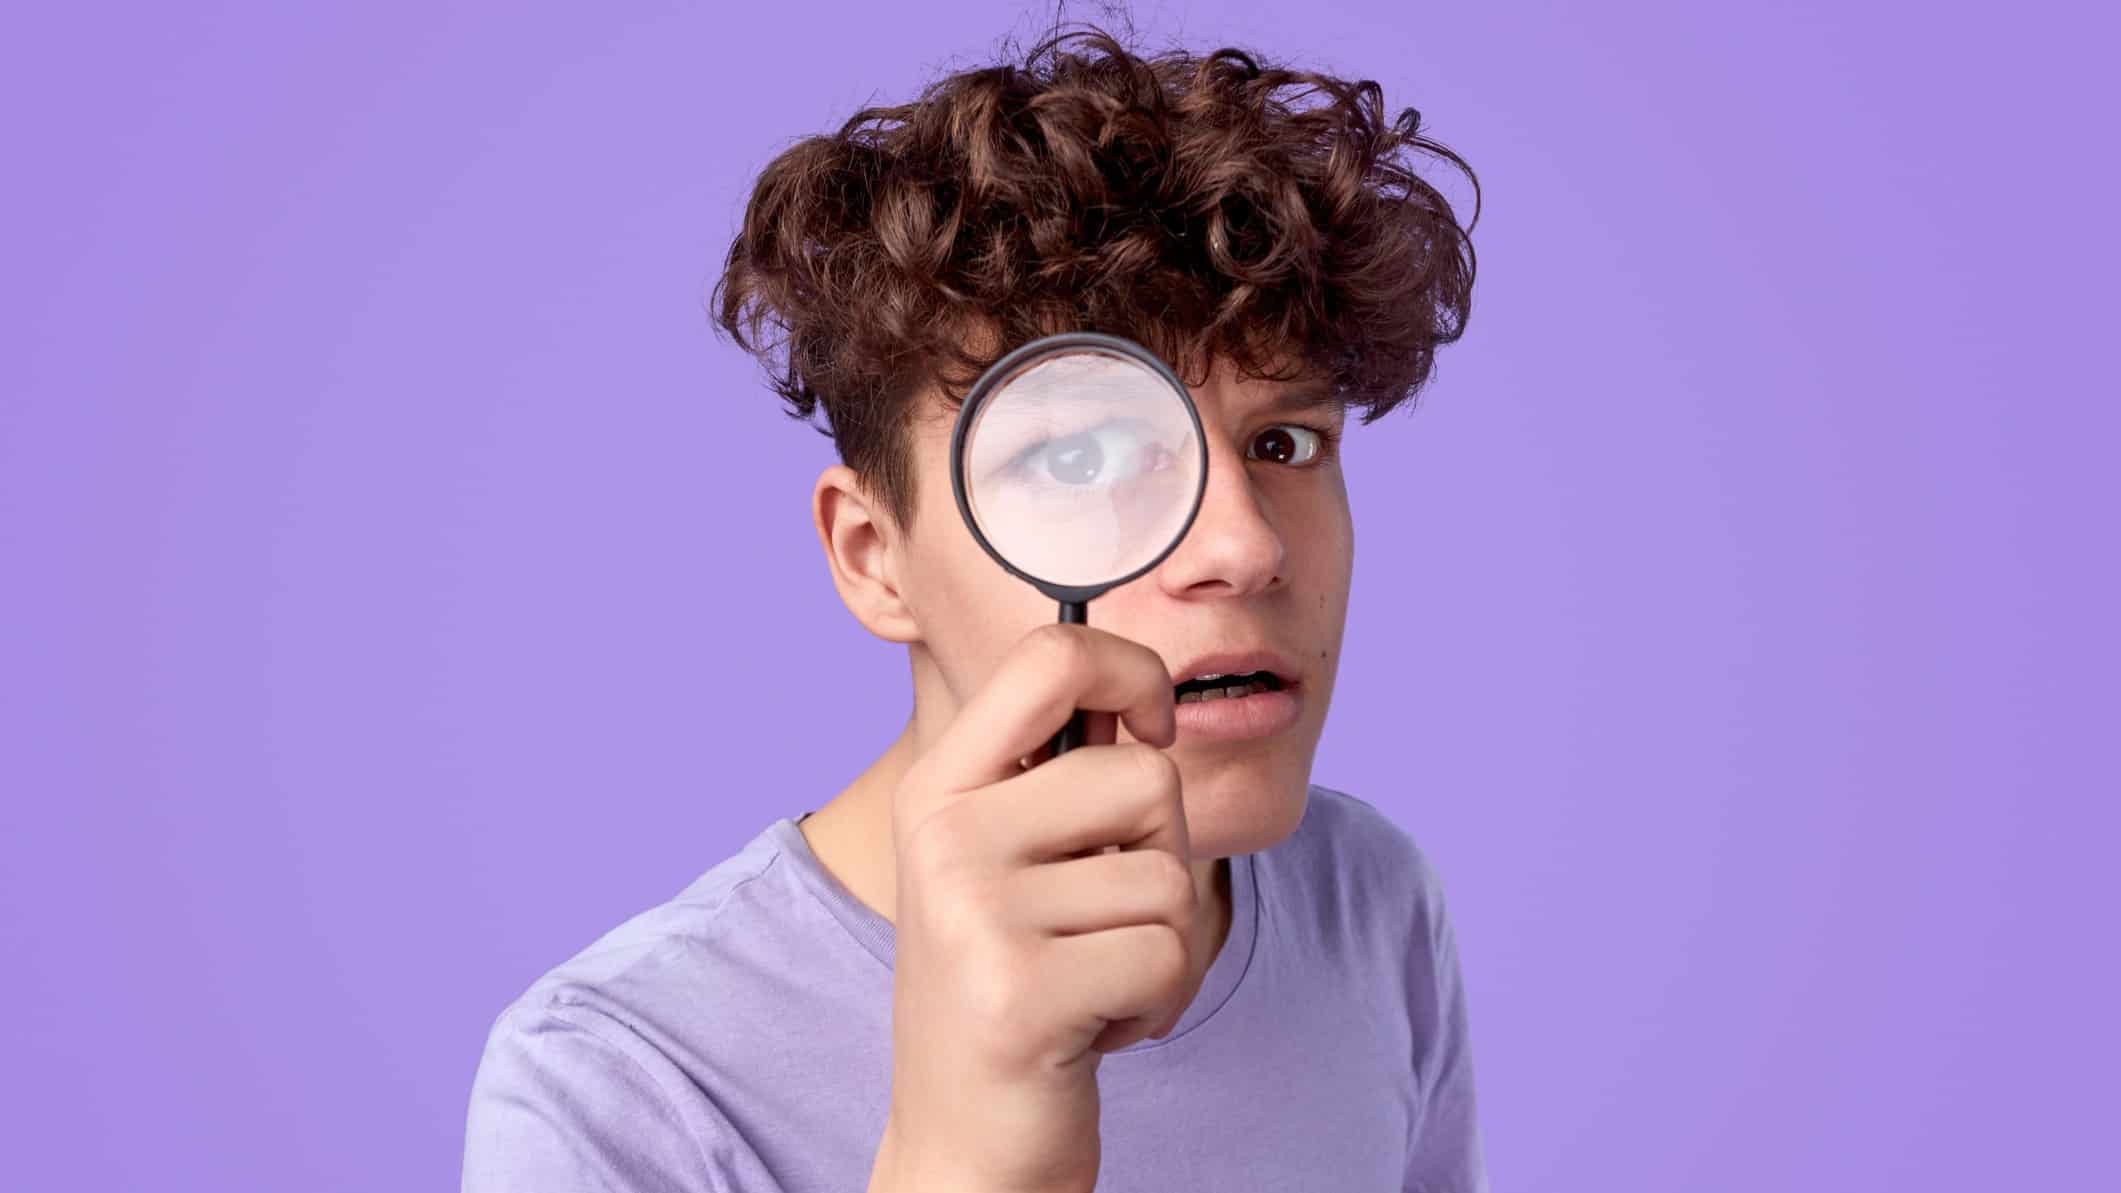 ASX share price on watch represented by man looking through magnifying glass